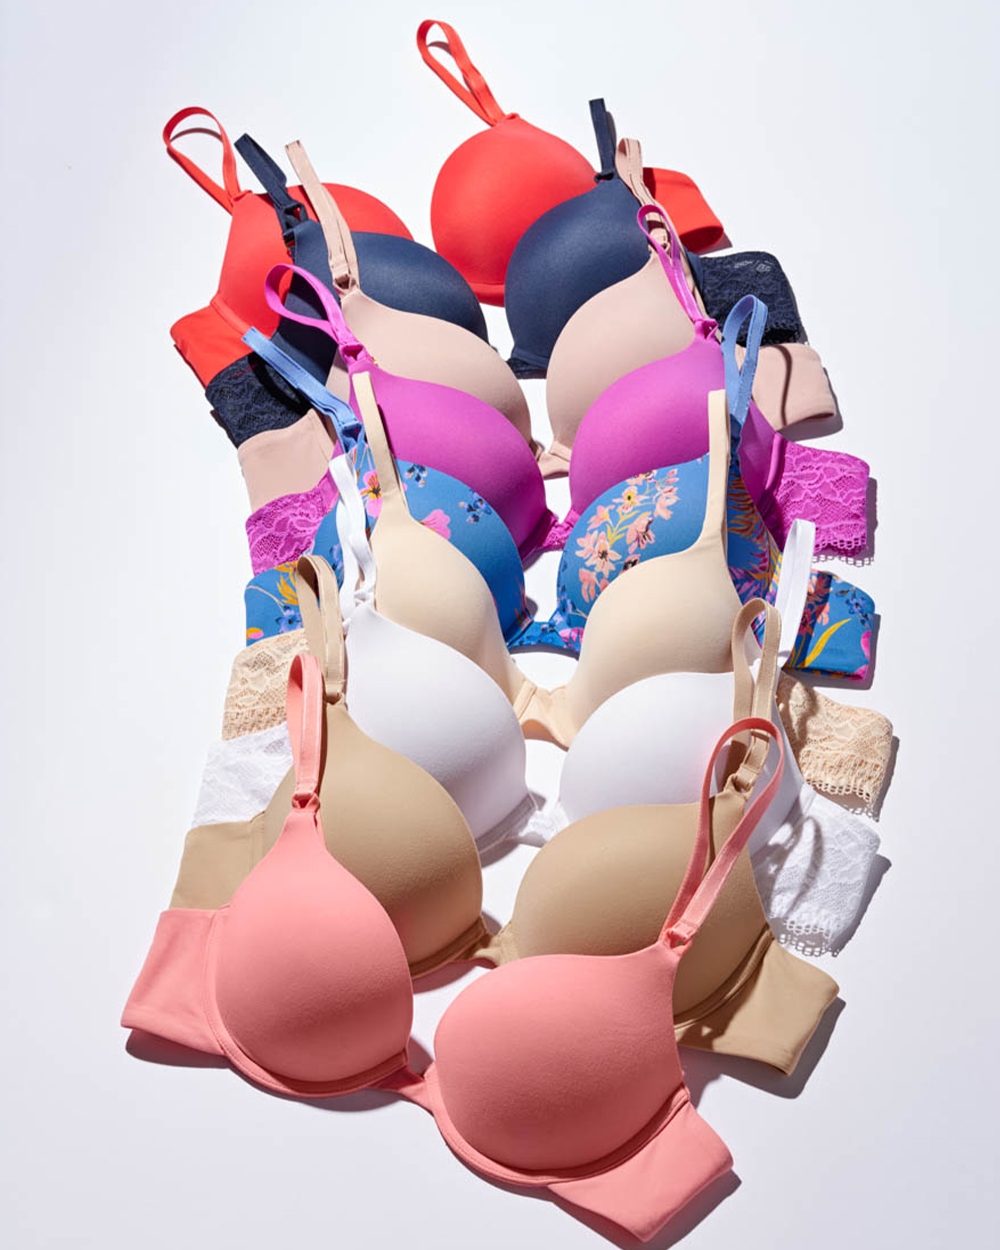 Soma<sup class=st-superscript>®</sup> laydown of red, navy, nude, pink, blue floral, and white push-up bras.